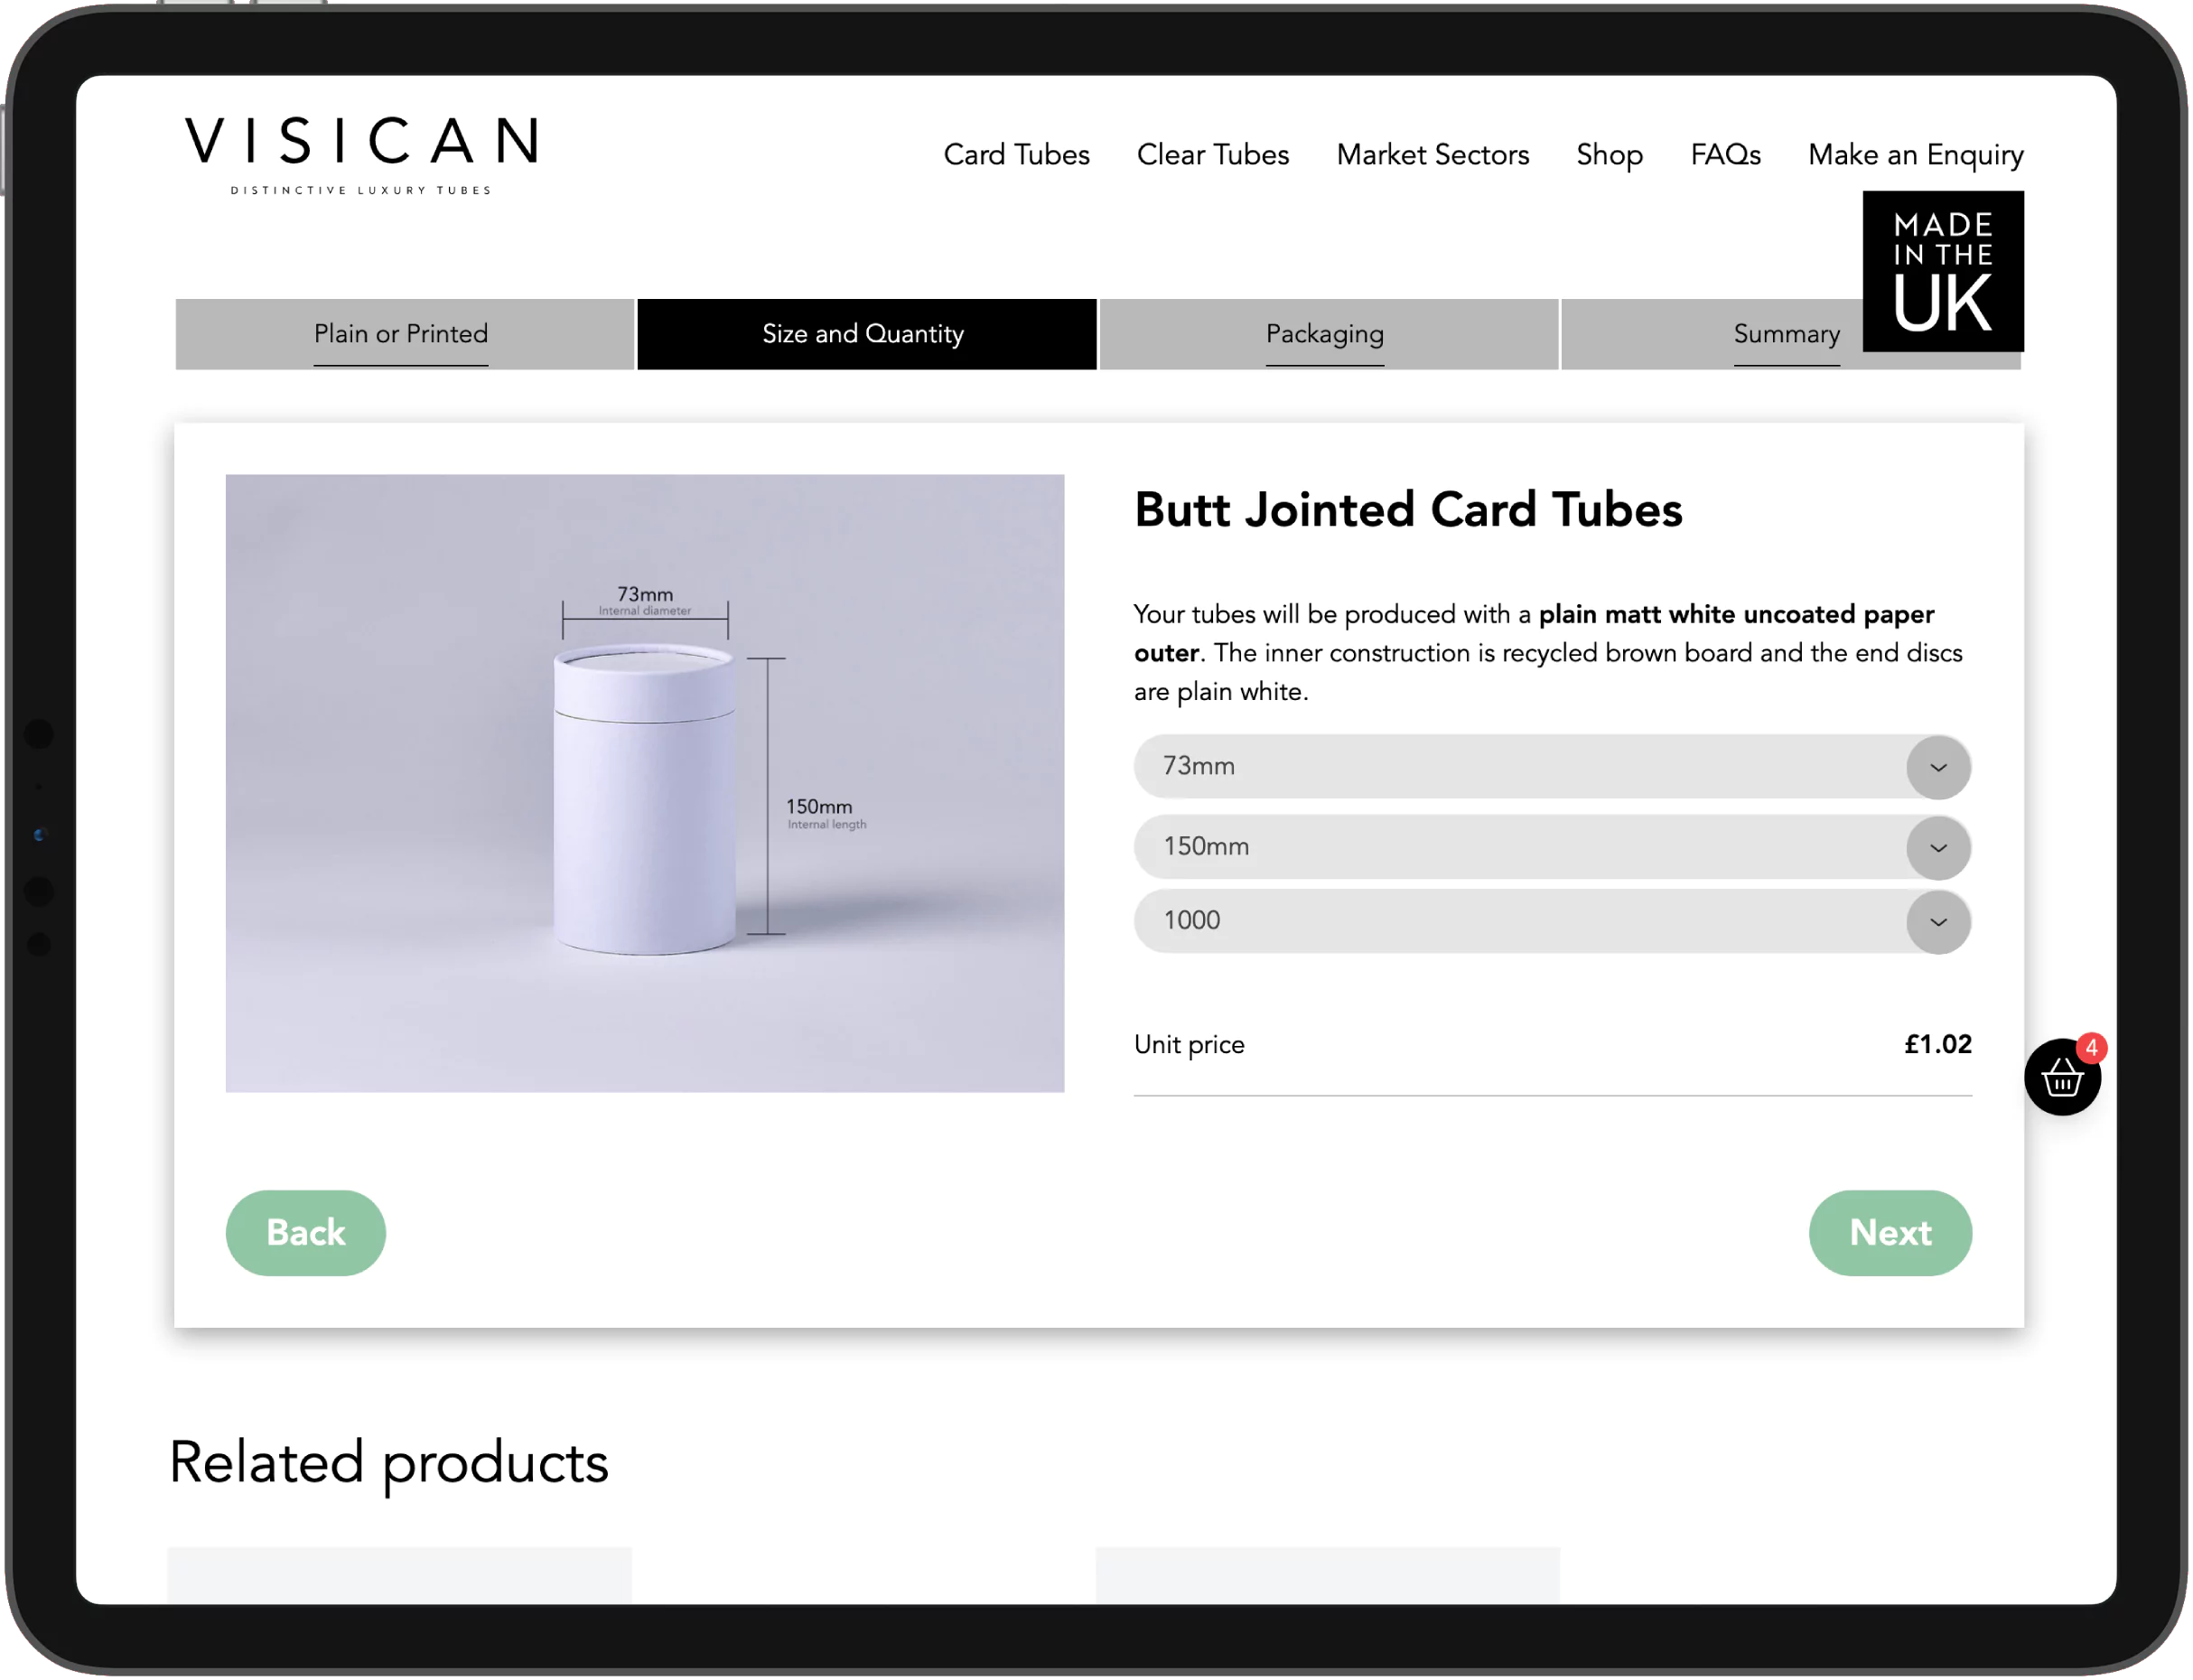 A screenshot of Visican's online shop second step where a user can select the size and quantity of card tubes.